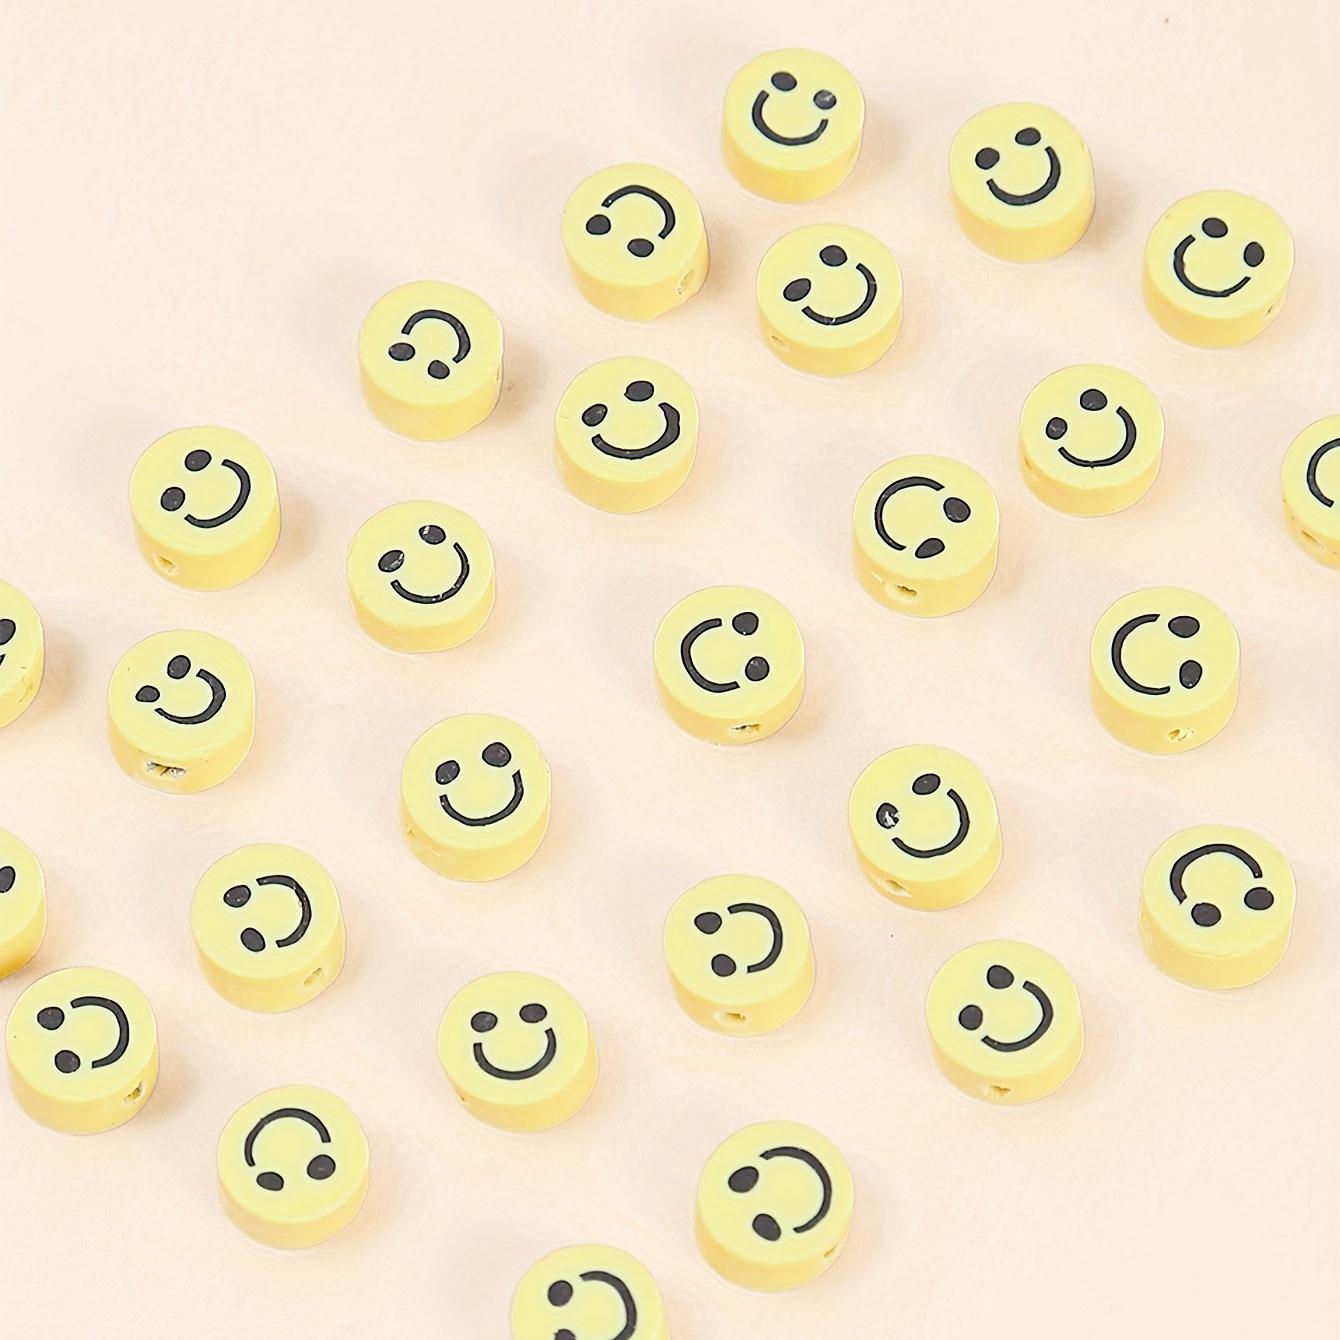 45styles 40-50PCS/Box Polymer Clay Bead Animal Smiling Face Flower Fruit  Beads For Jewelry Making DIY Bracelet Earring Necklace